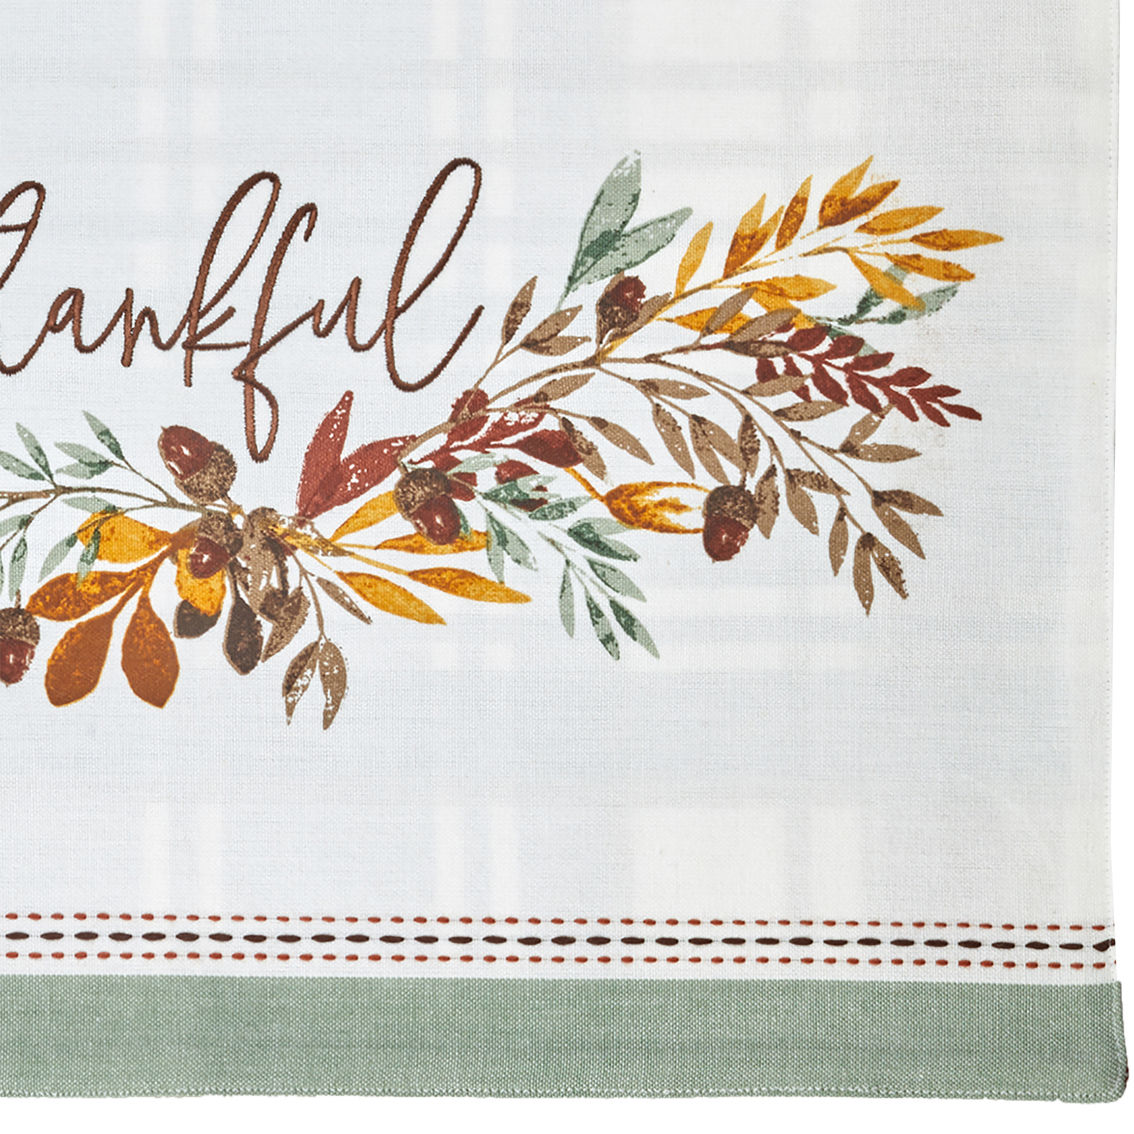 Design Imports Thankful Reversible Placemats, Set of 4 - Image 2 of 9